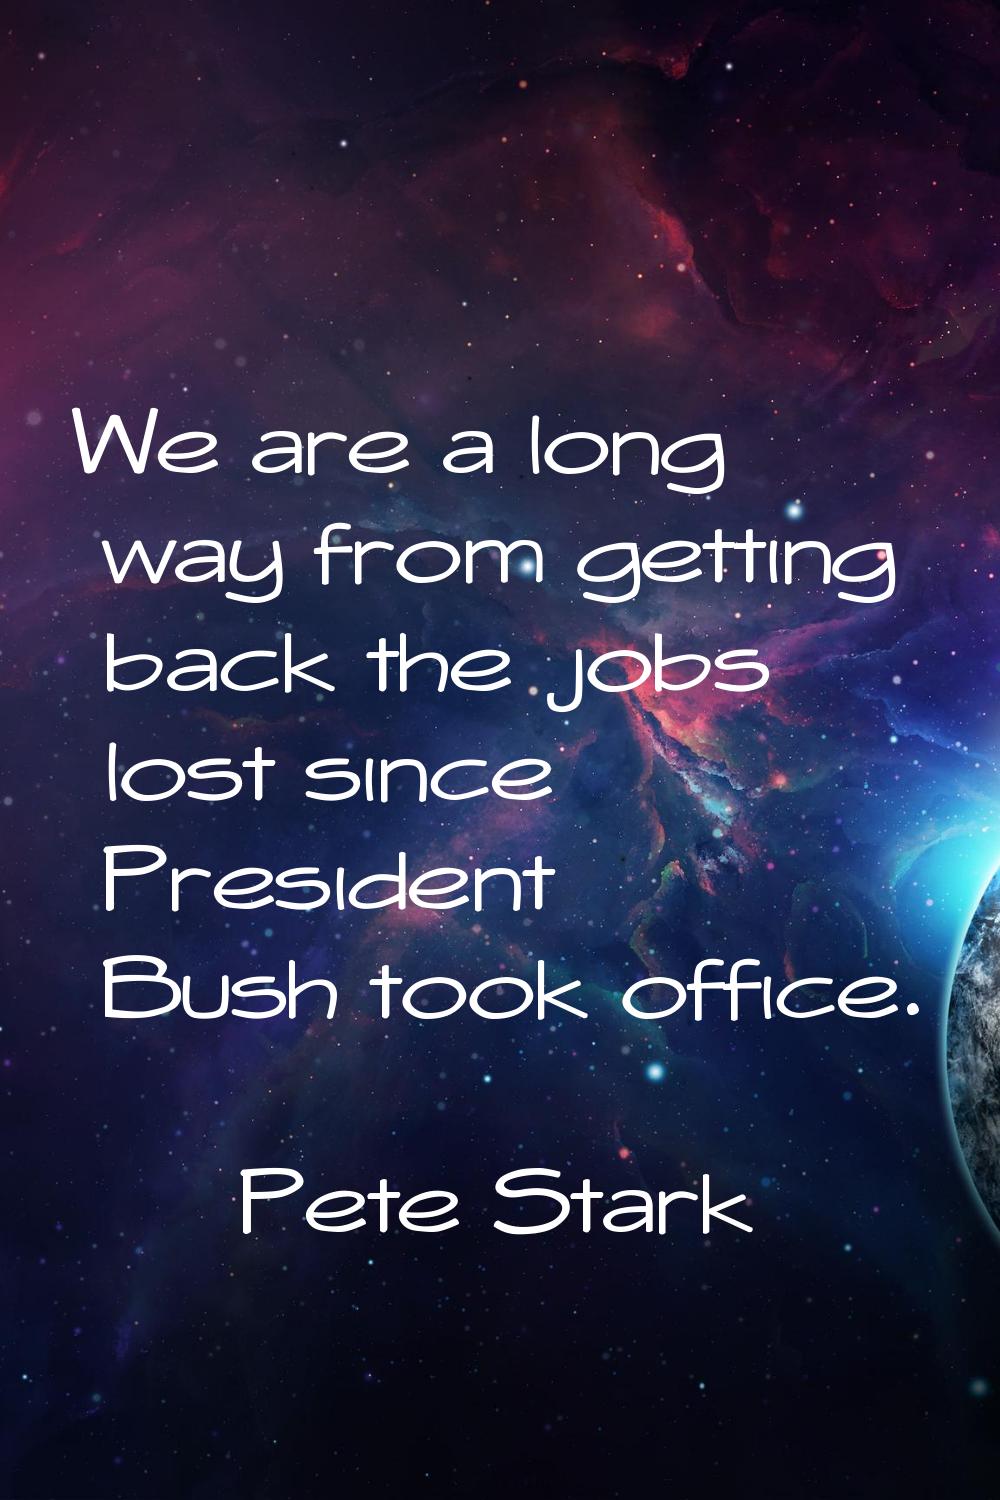 We are a long way from getting back the jobs lost since President Bush took office.